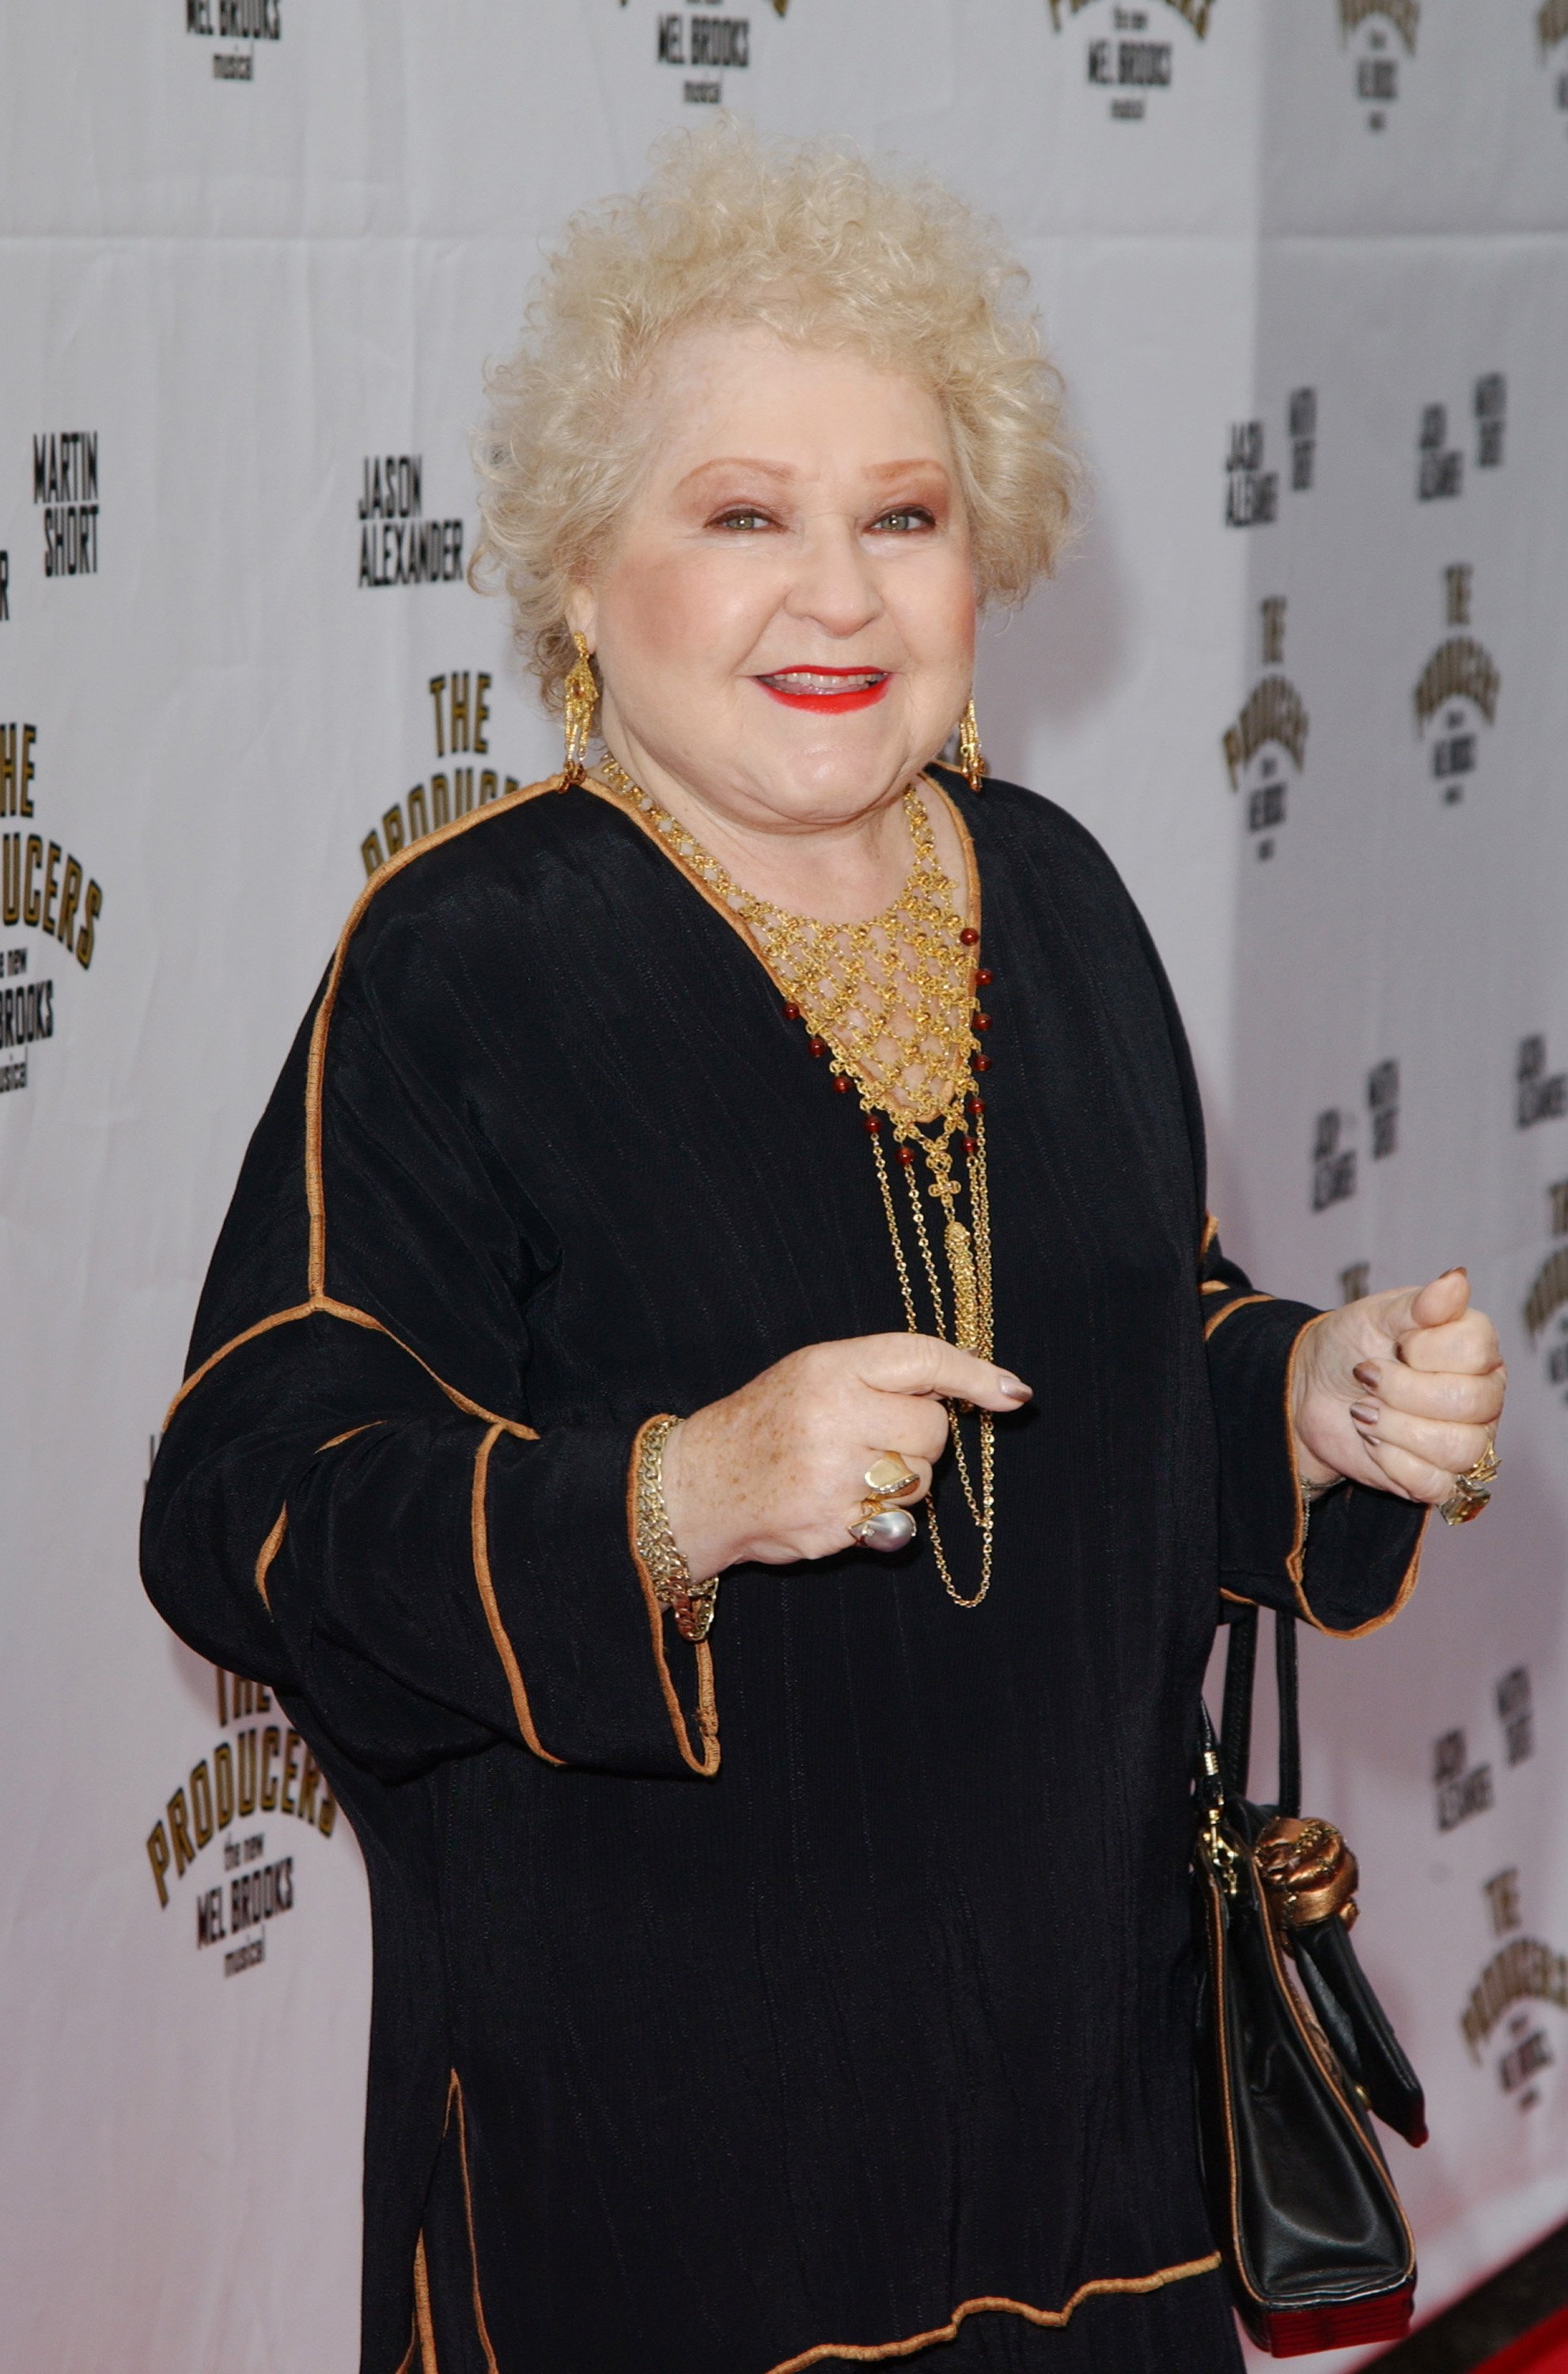 Estelle Harris during Opening Night of "The Producers" in Hollywood, California. | Source: Jon Kopaloff/Getty Images